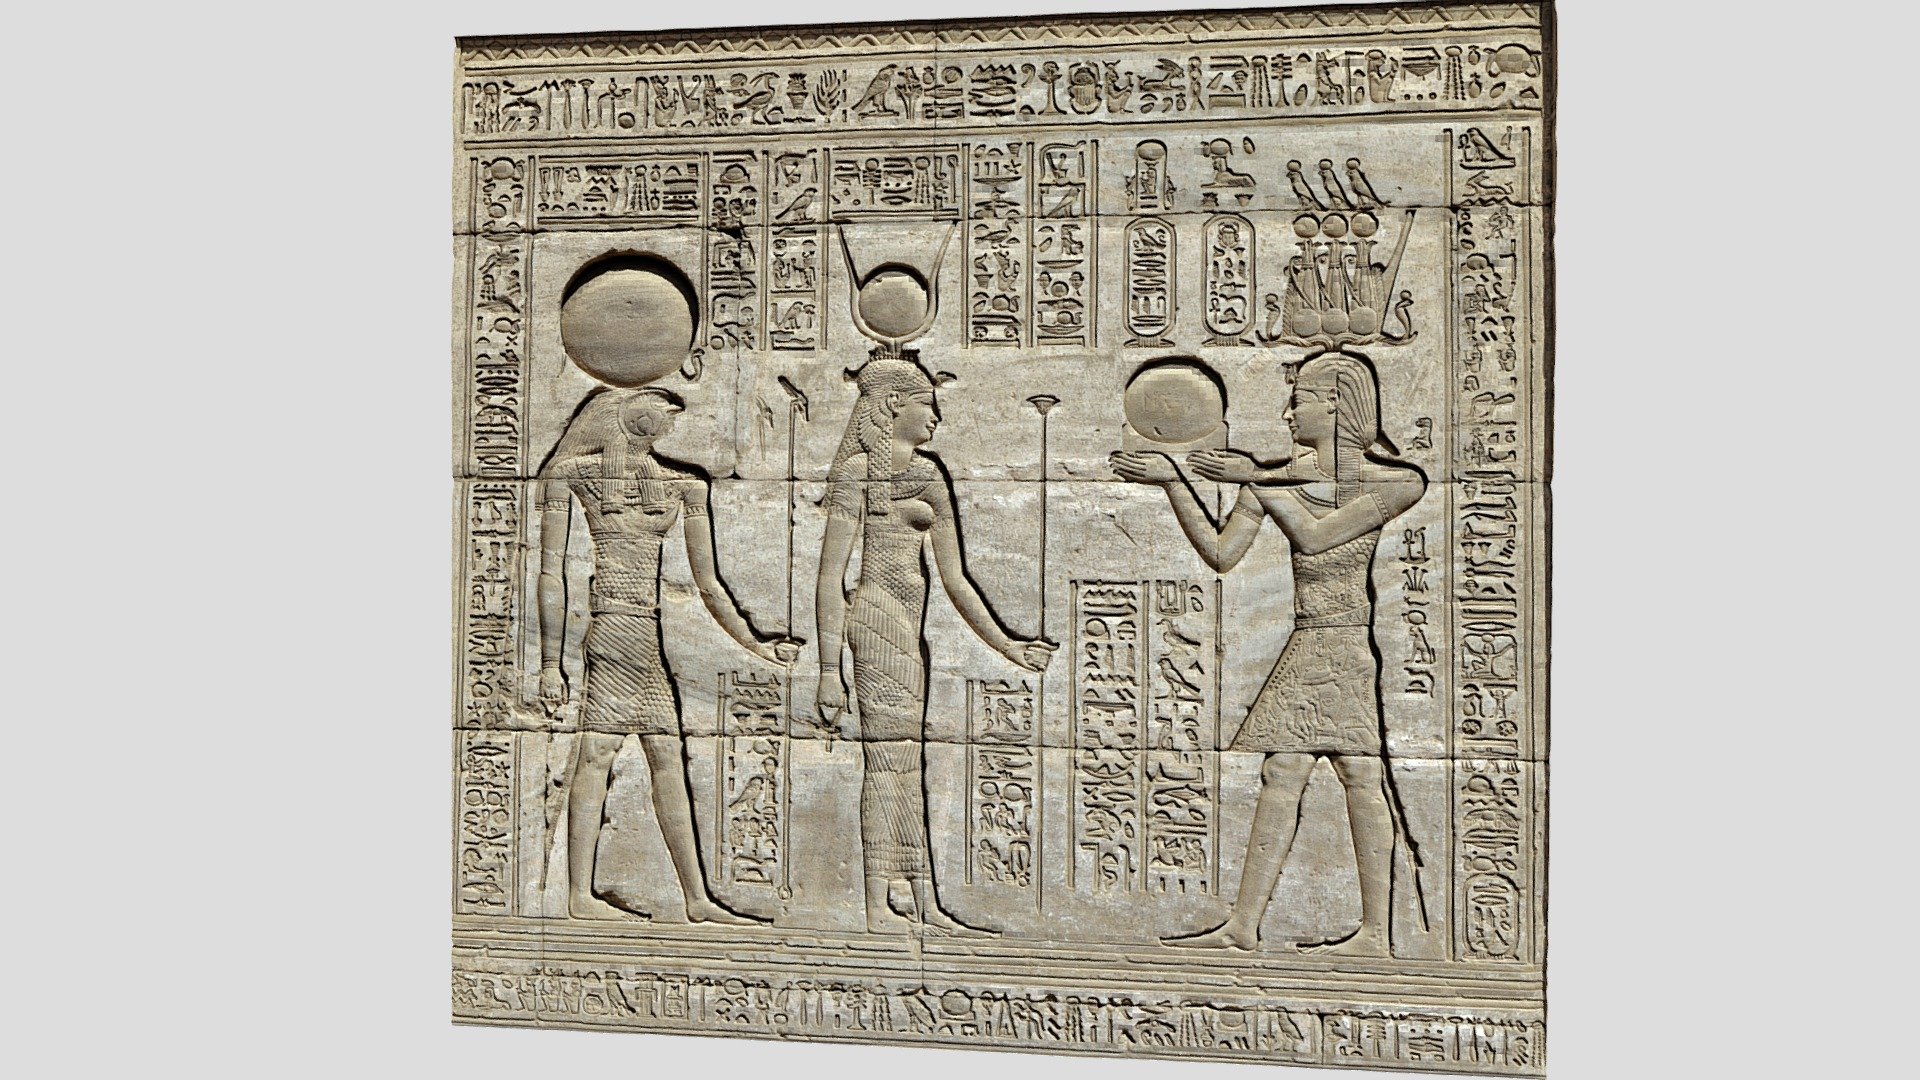 Egypt. Dendera. Temple complex. Roman Birth House of Mammisi. The Roman Emperor Trajan, depicted as a pharaoh and wearing a triple Atef crown, offers an image of the Rising Sun to the goddess Hathor and her husband Horus.Fifth intercolumnar wall. South outer face. Relief 3d model